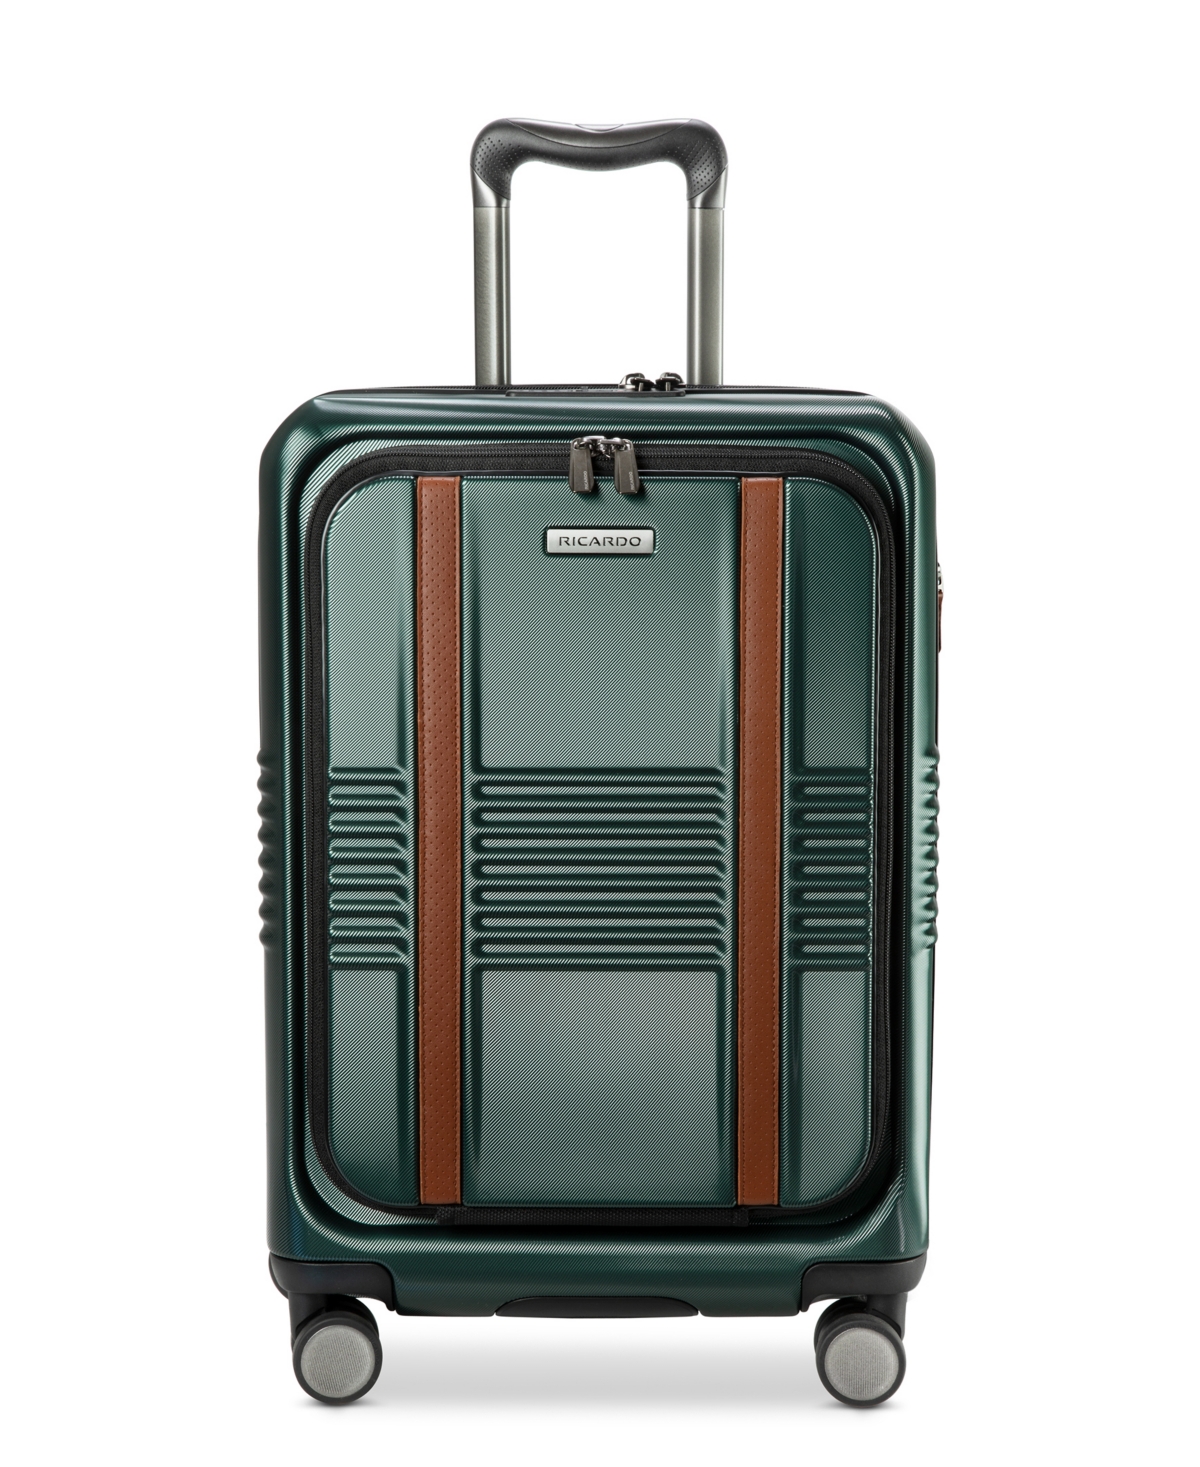 Ricardo Cabrillo 3.0 Hardside 21" Carry-on With Fastaccess Front Pocket In Emerald